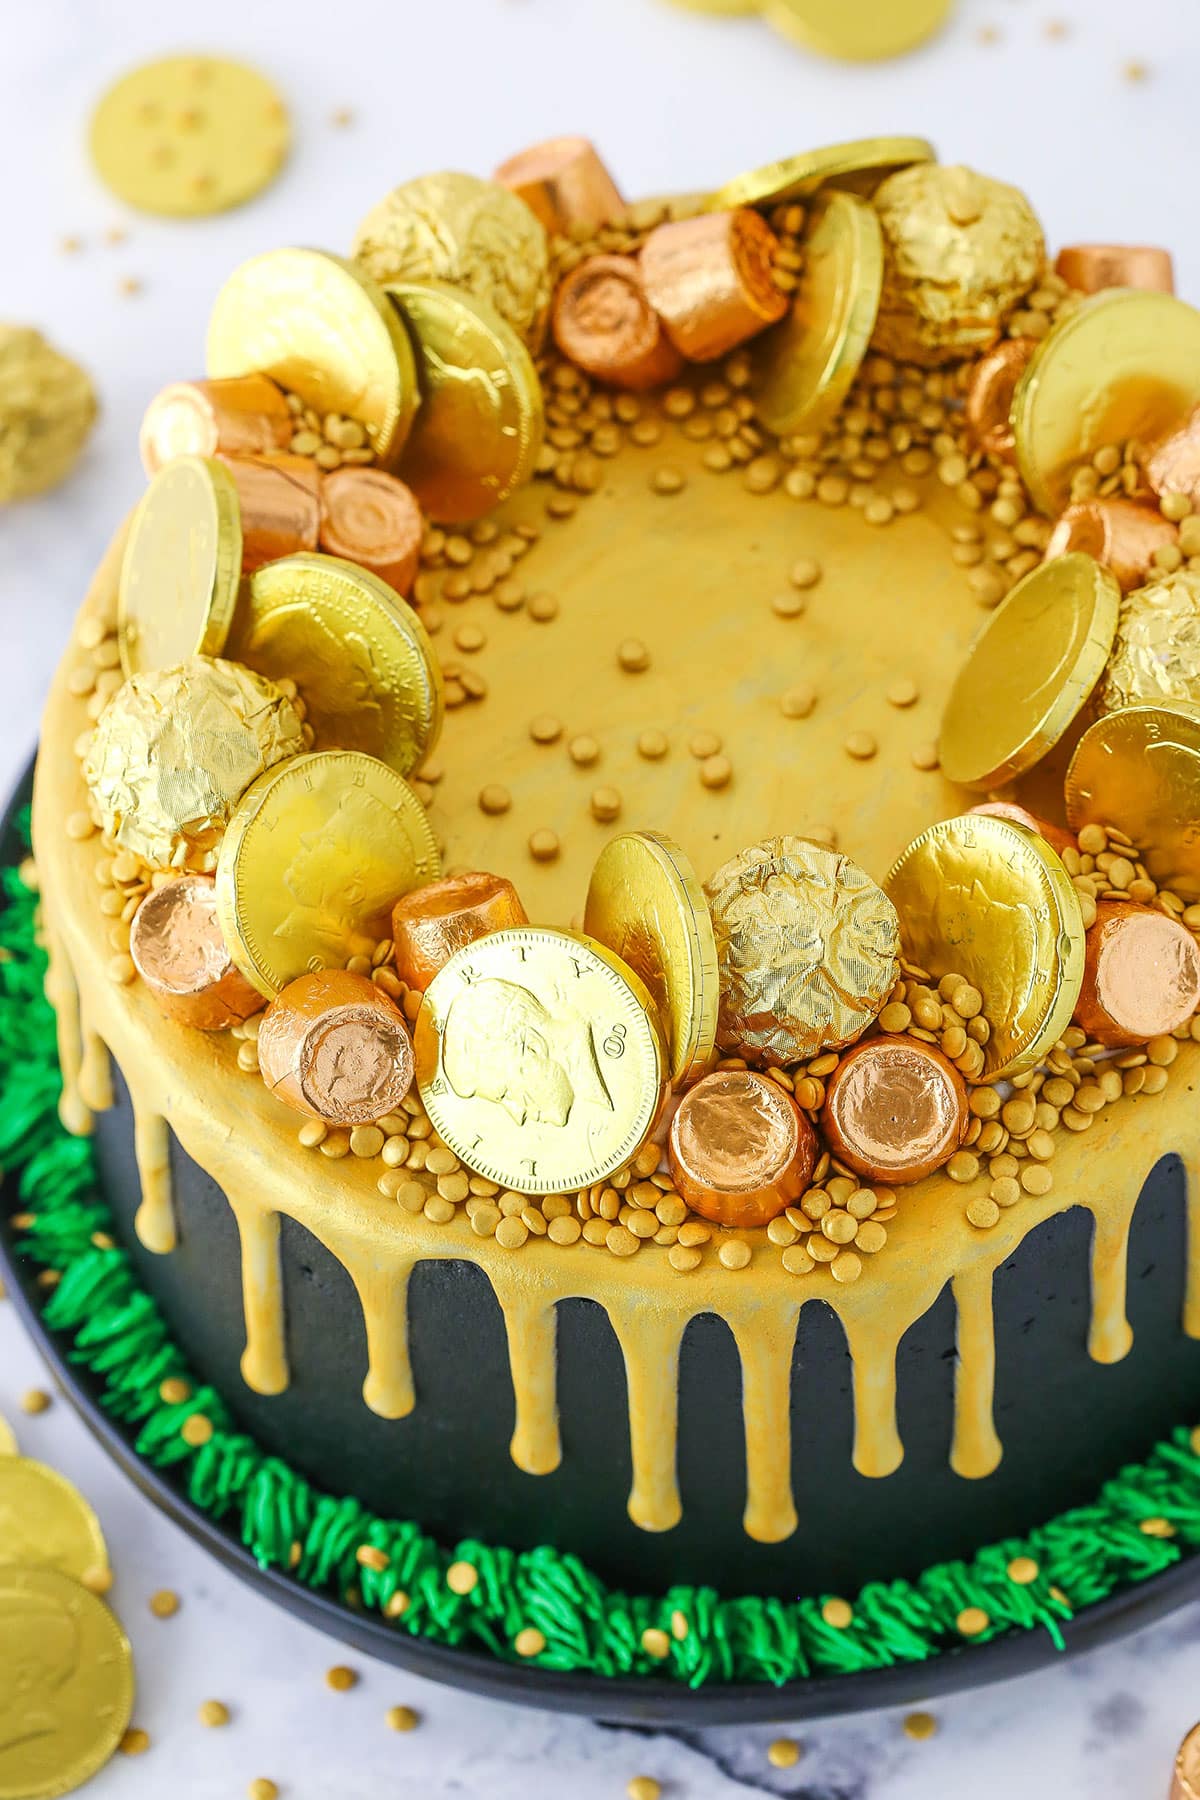 Personalized Coin Cake - CakeCentral.com